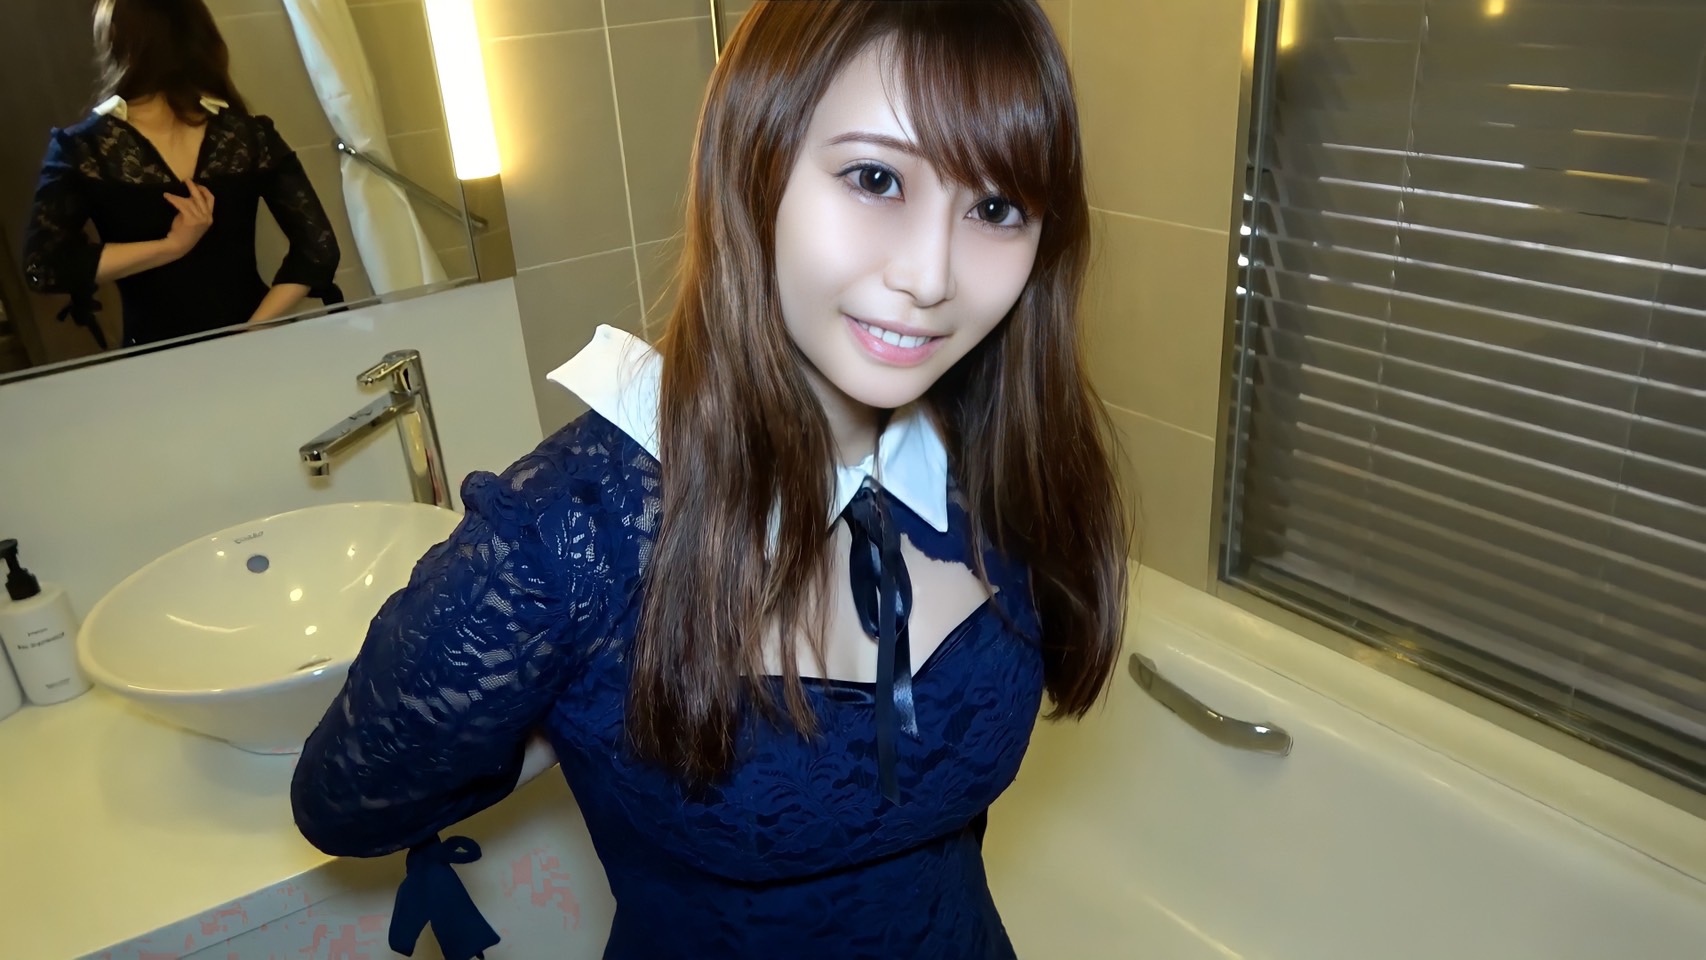 FC2-PPV 2872472 Jav online Fair skinned half type G-cup beauty sequel With such a beautiful face youll be shocked by yourself Too erotic - SS Server